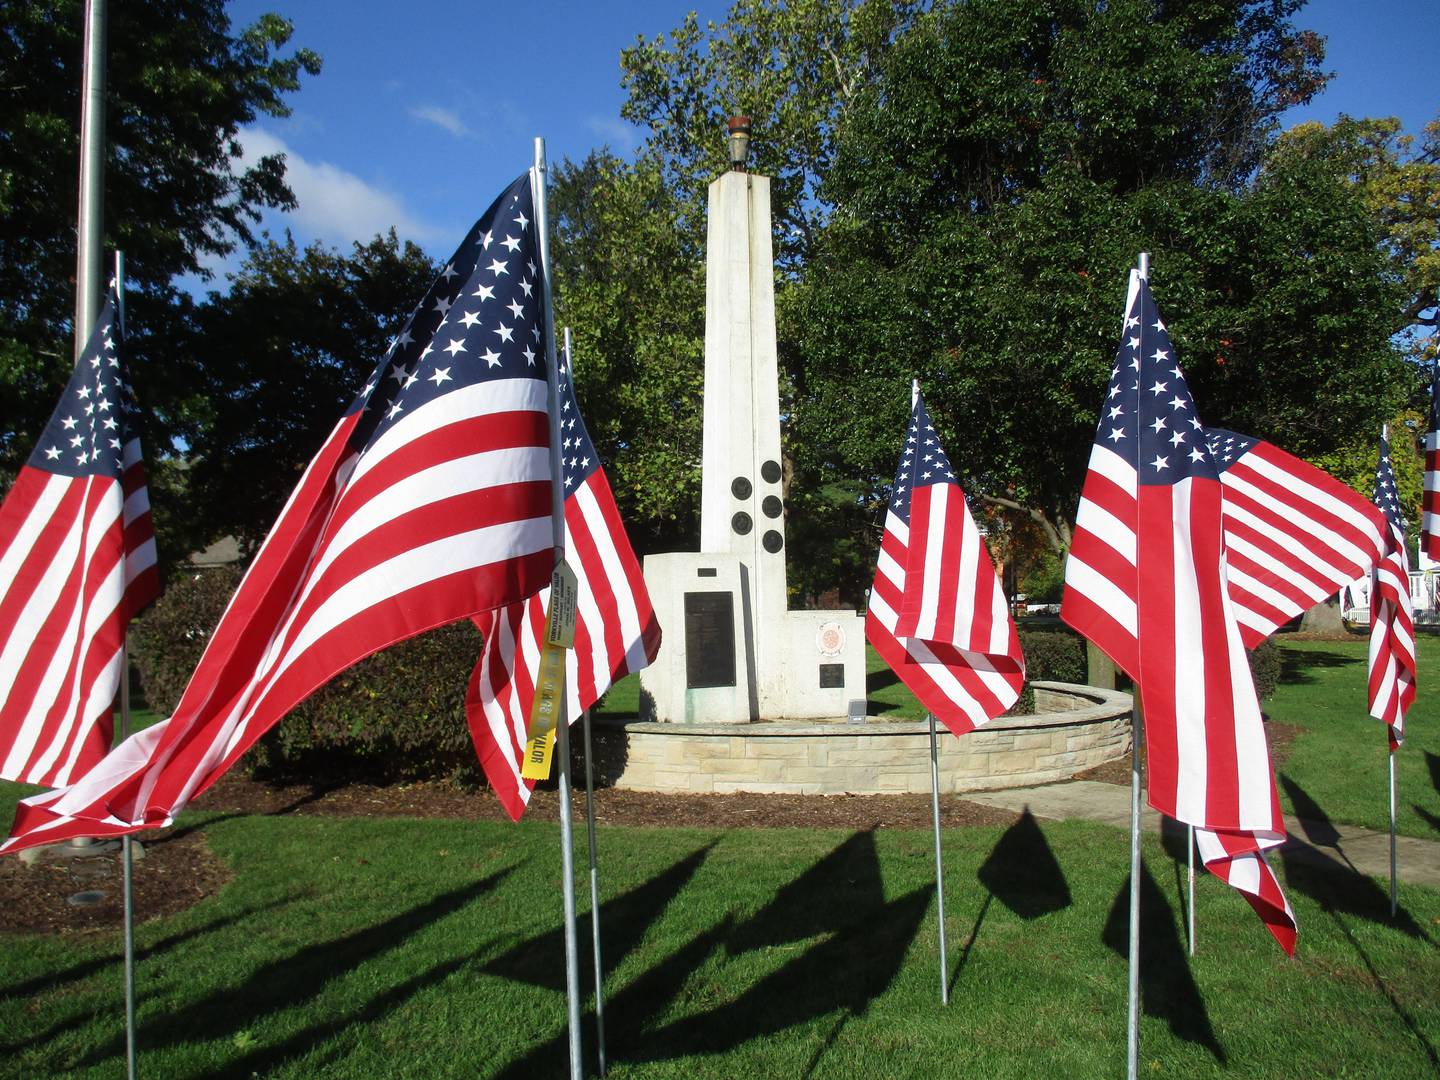 The Yorkville War Memorial, honoring the memory of Kendall County residents who died in service to their country, was dedicated on May 30, 1969. The memorial, is the centerpiece of Town Square Park, which is playing host to the annual Flags of Valor display. (Mark Foster - mfoster@shawmedia.com)